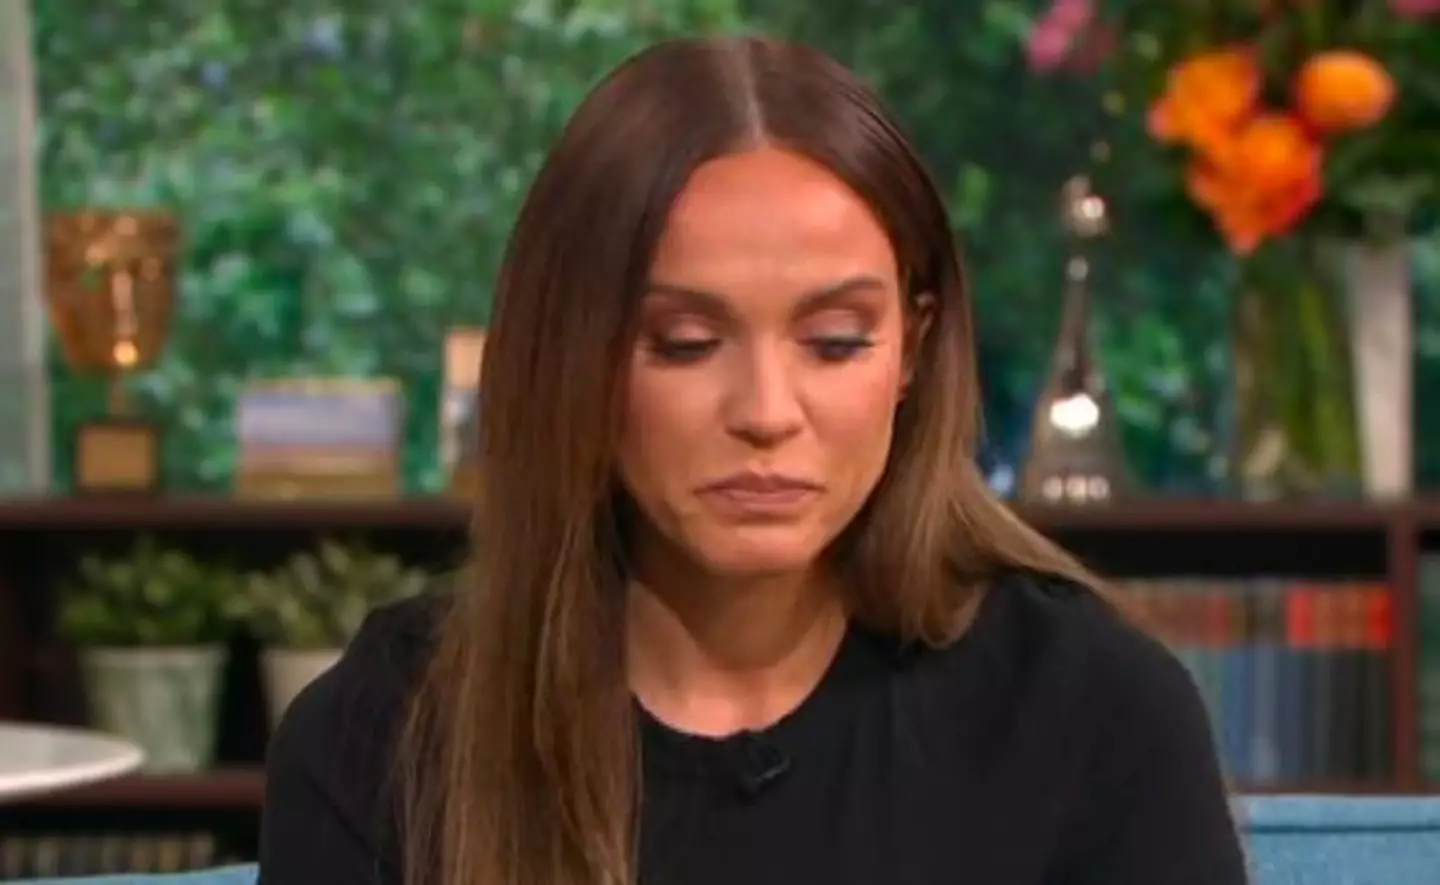 Vicky Pattison opened up about starting a family.